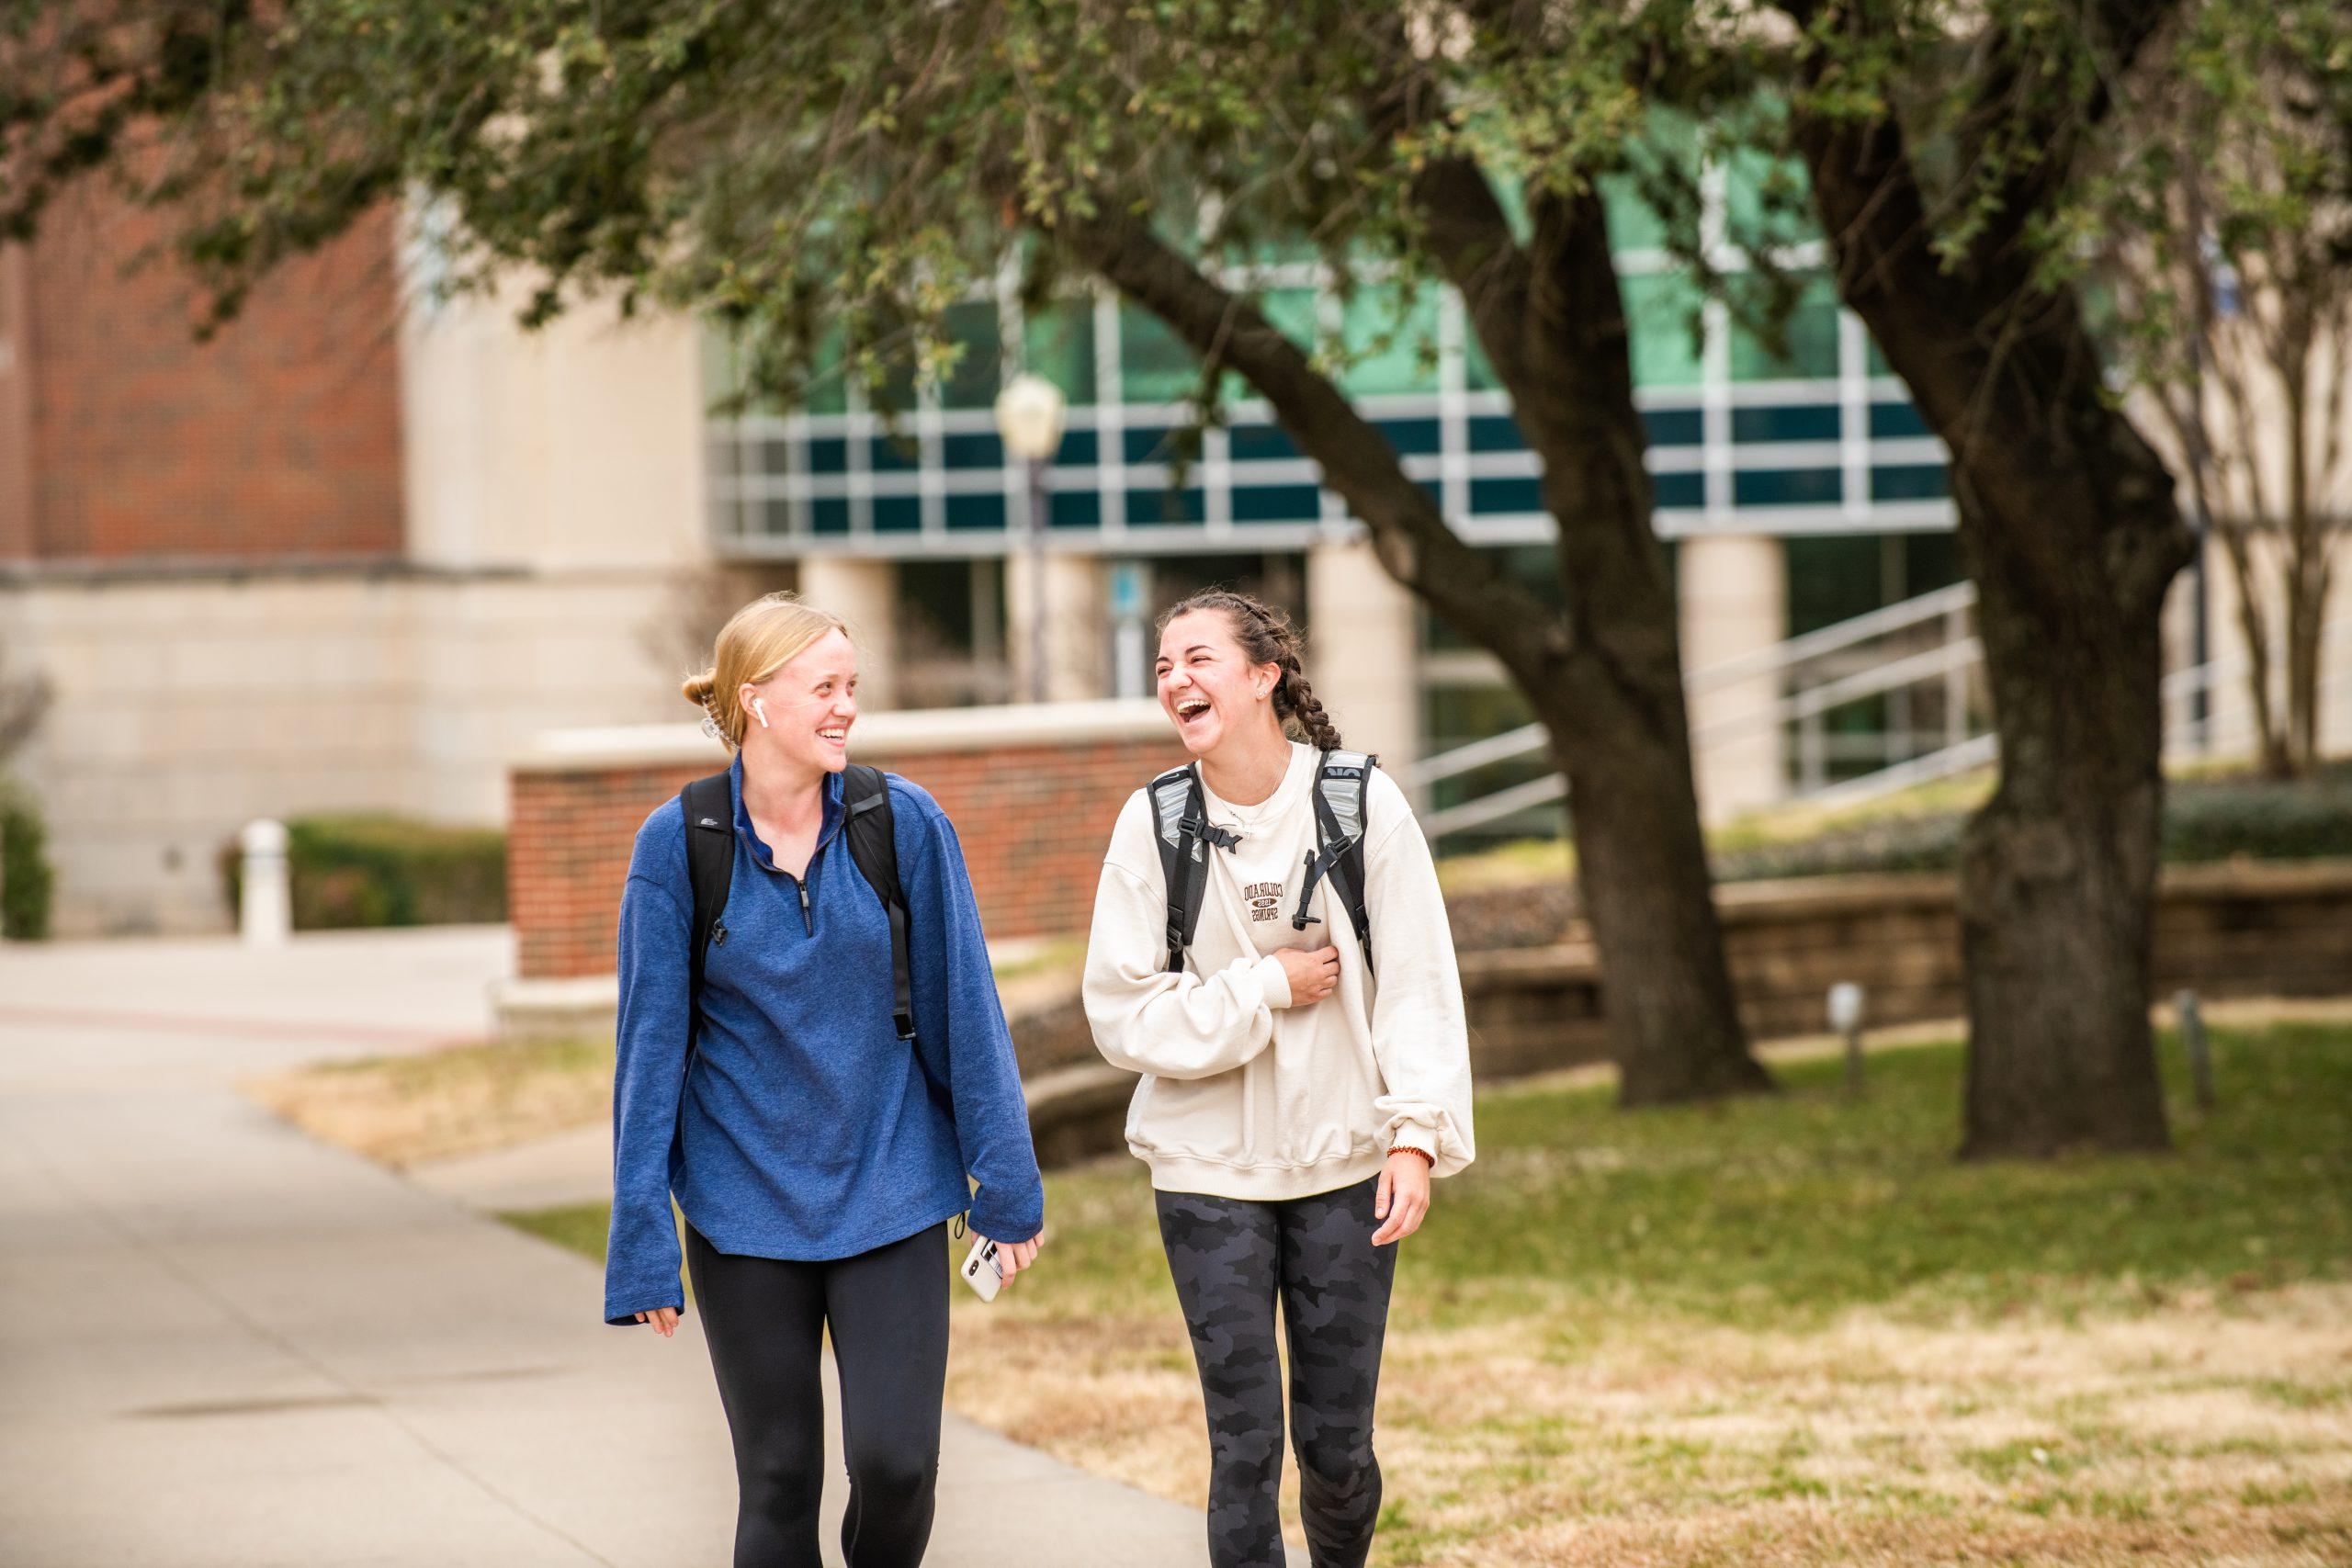 Two female students walking and speaking outside.